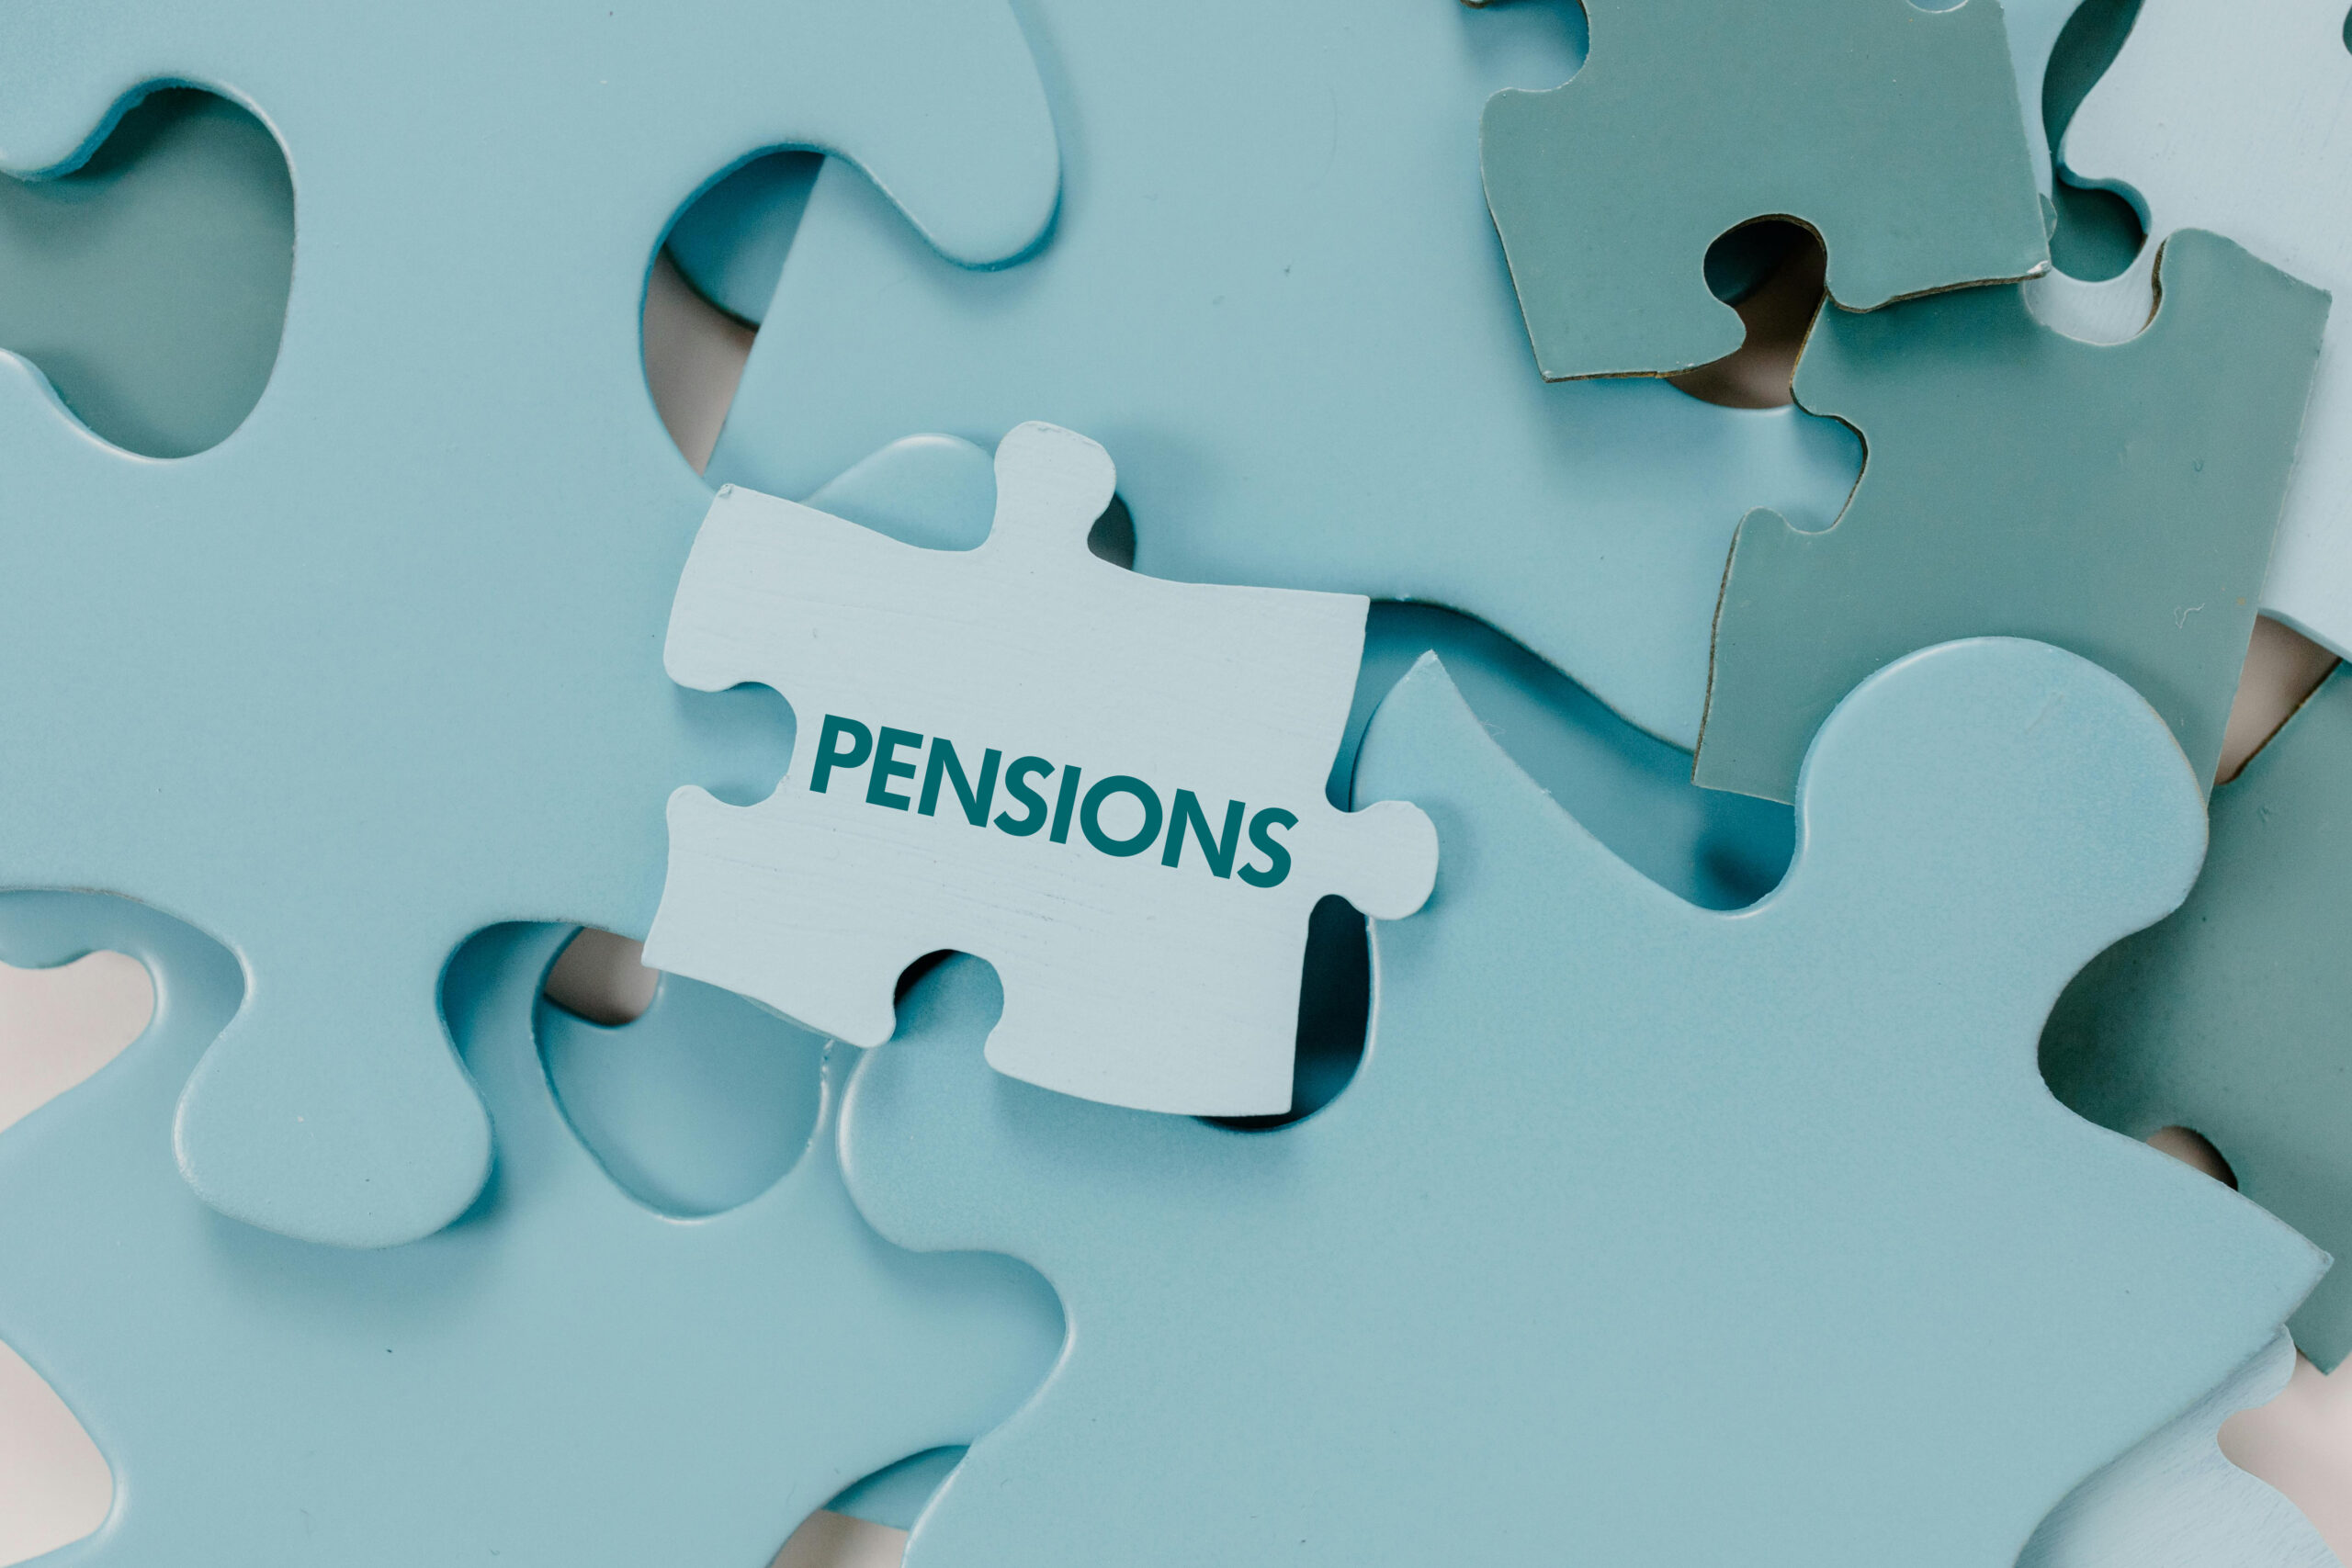 Are workplace Pensions complicated?